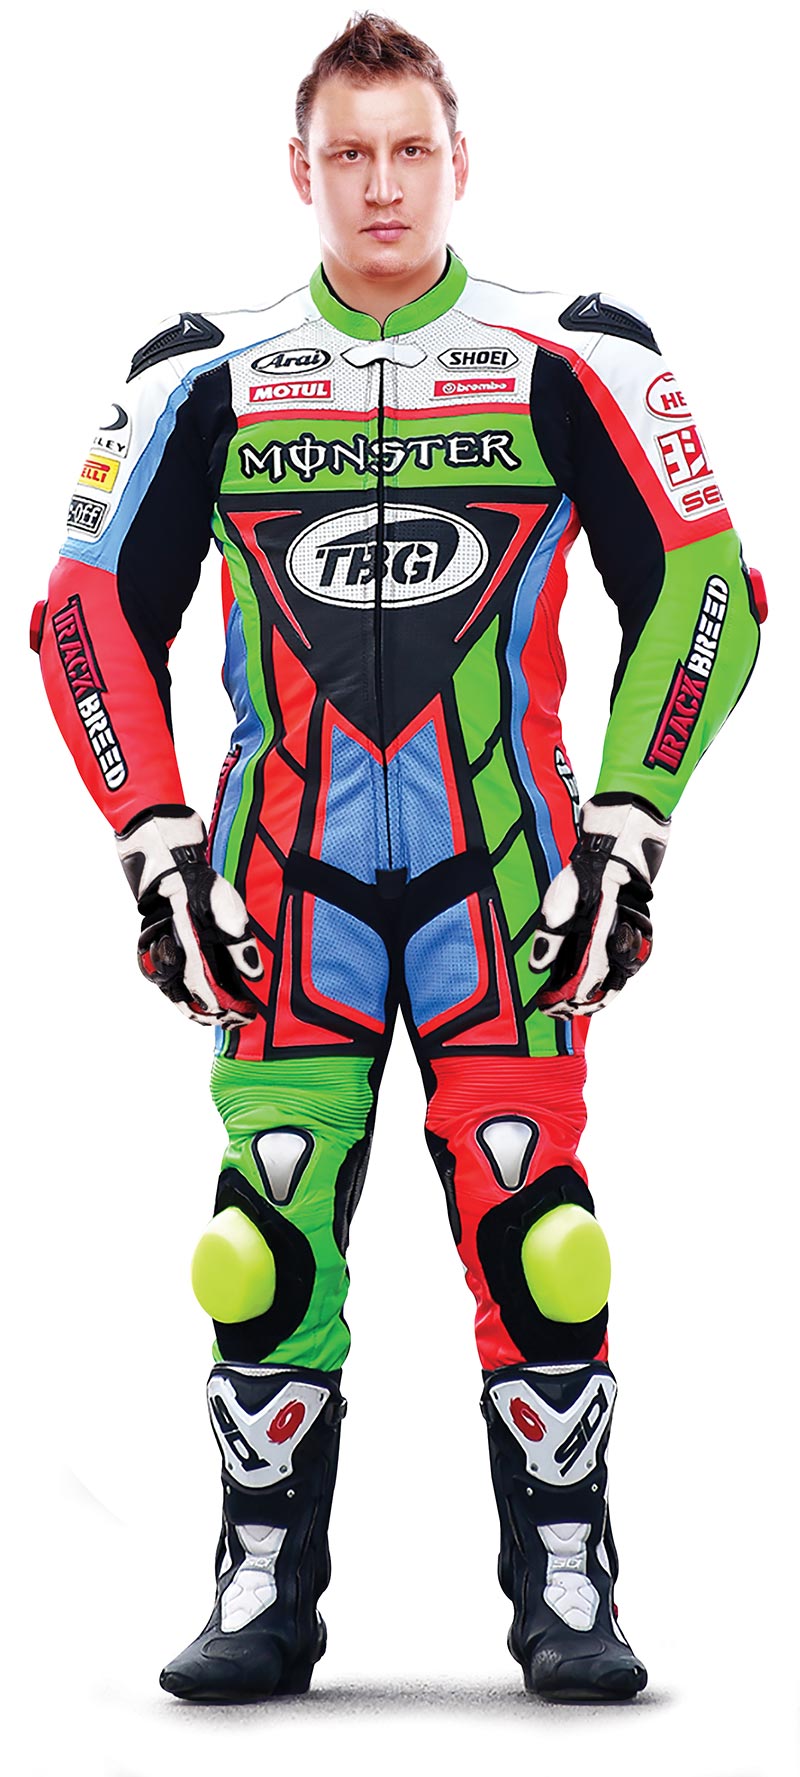 Man wearing one-piece motorcycle suit